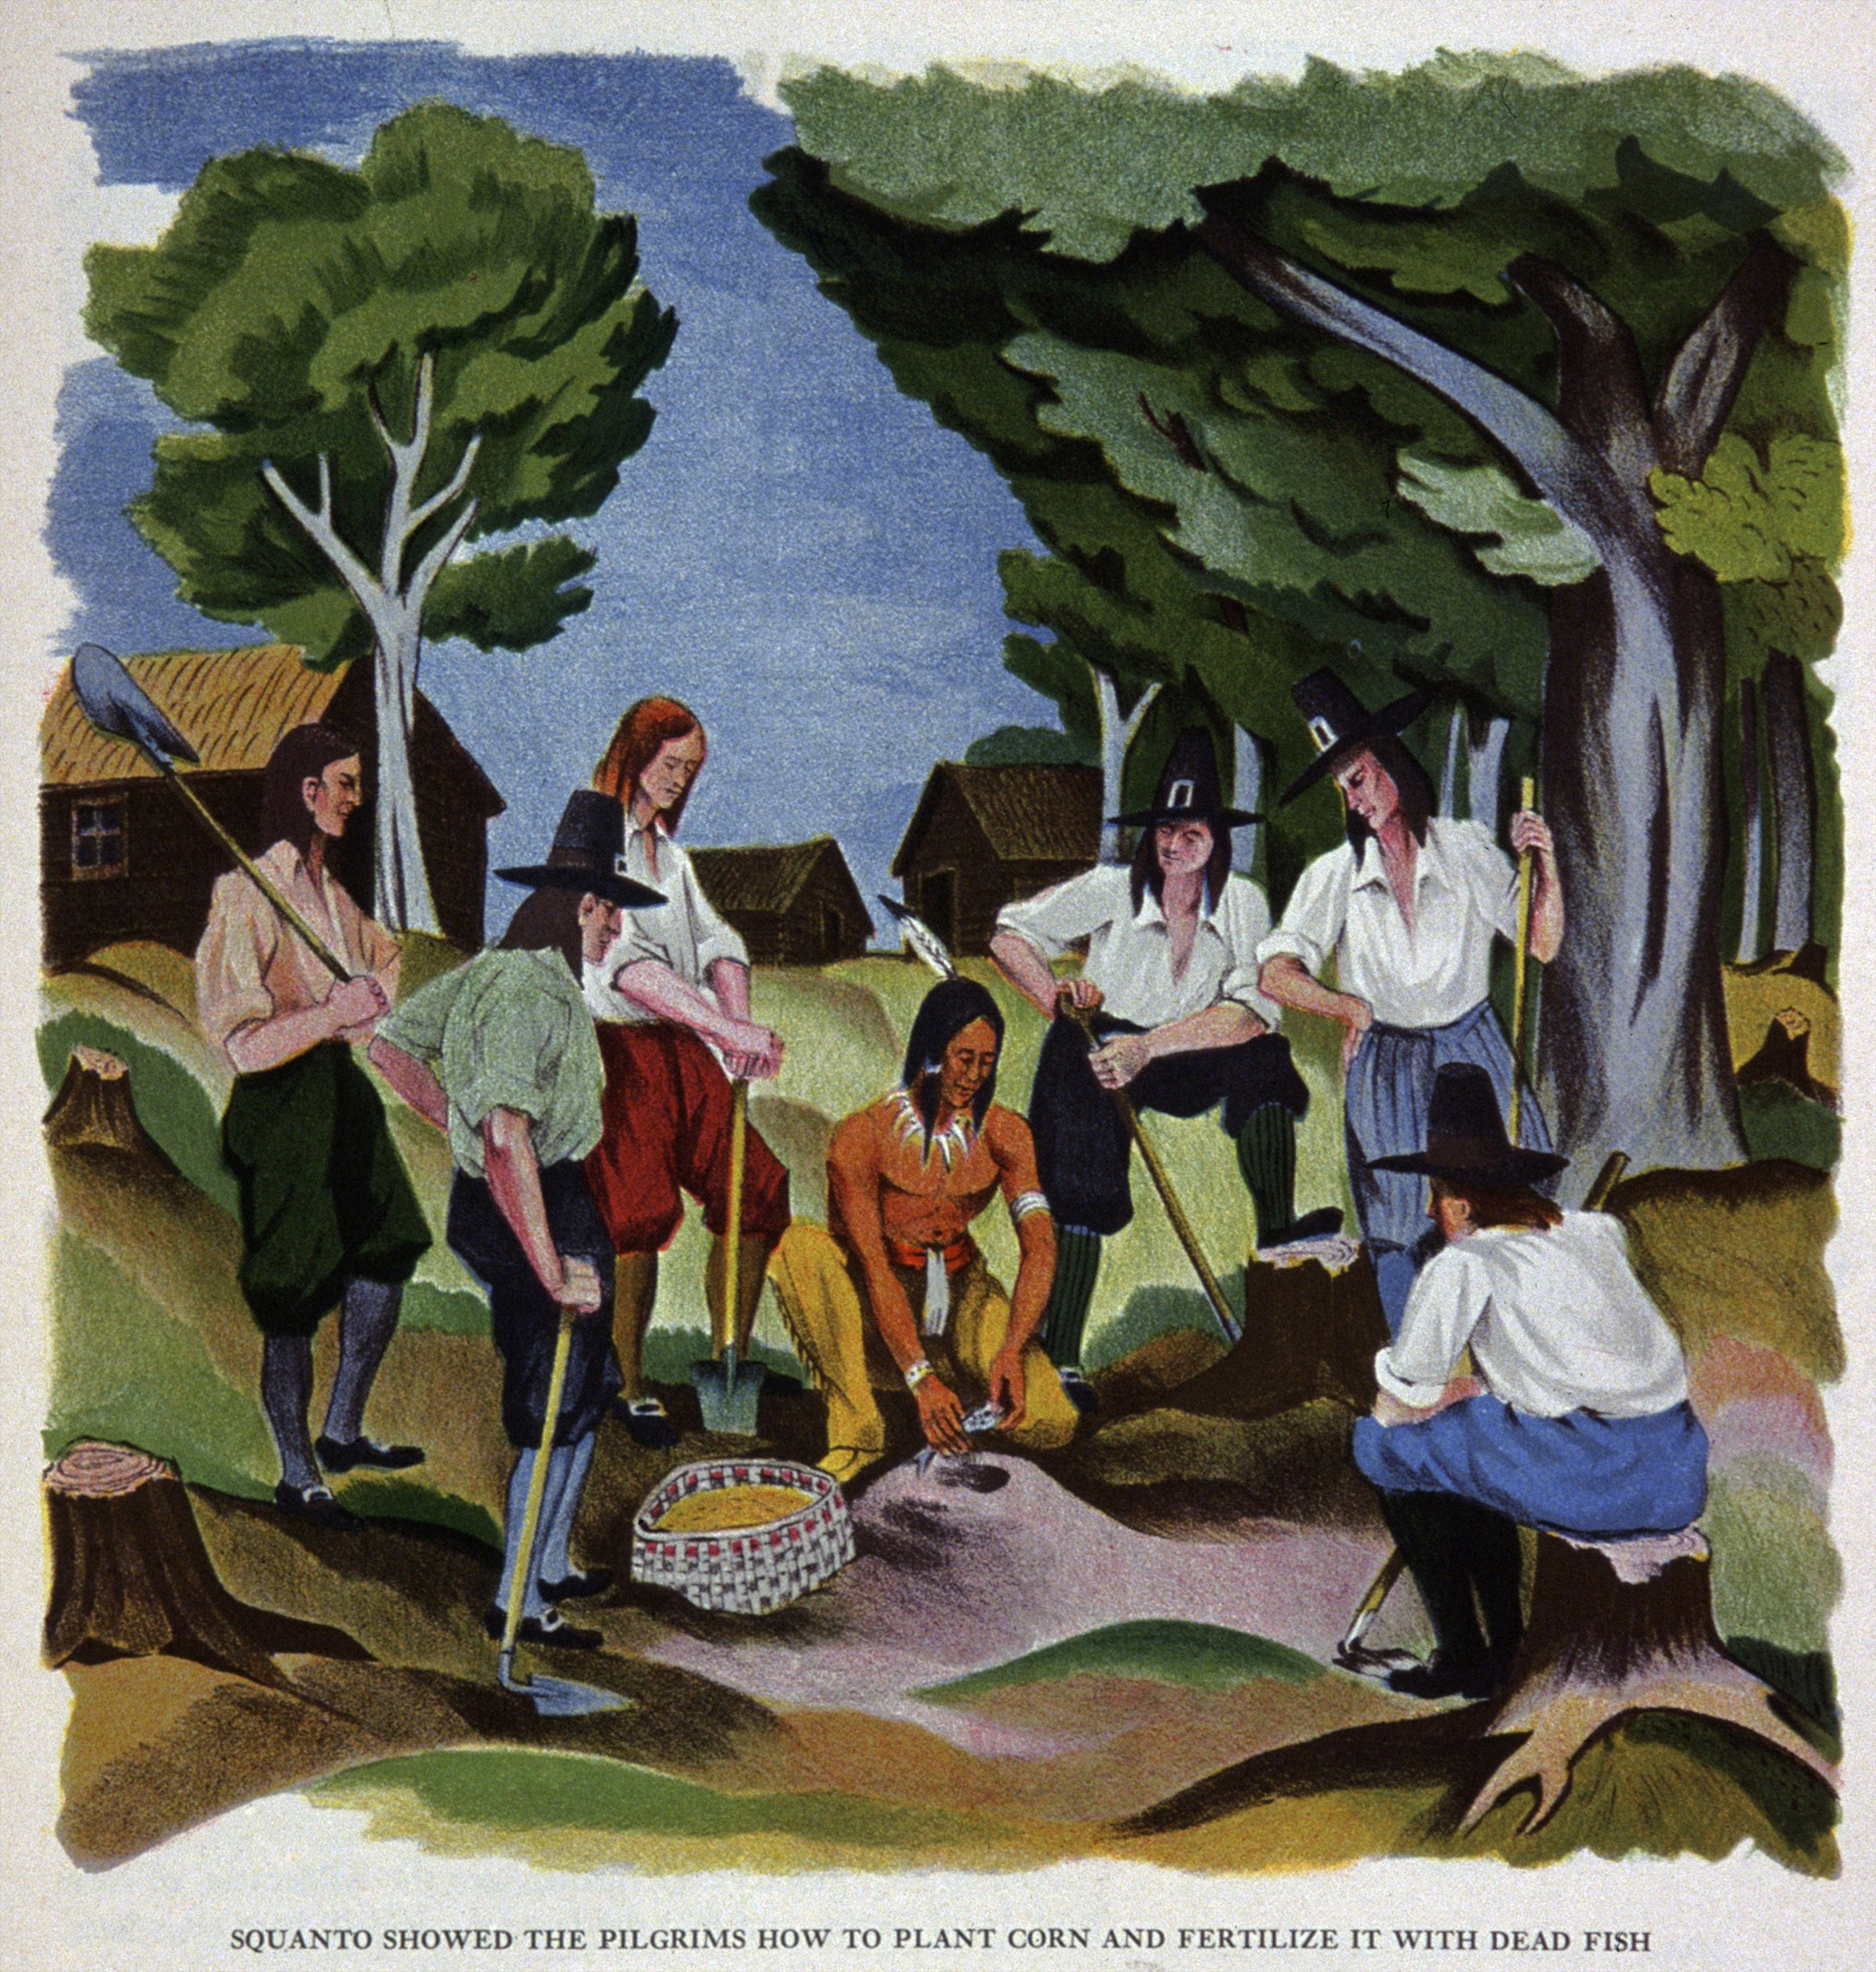 Squanto shows the pilgrims of the Mayflower how to plant corn and fertilize it with dead fish. Illustration circa 1930